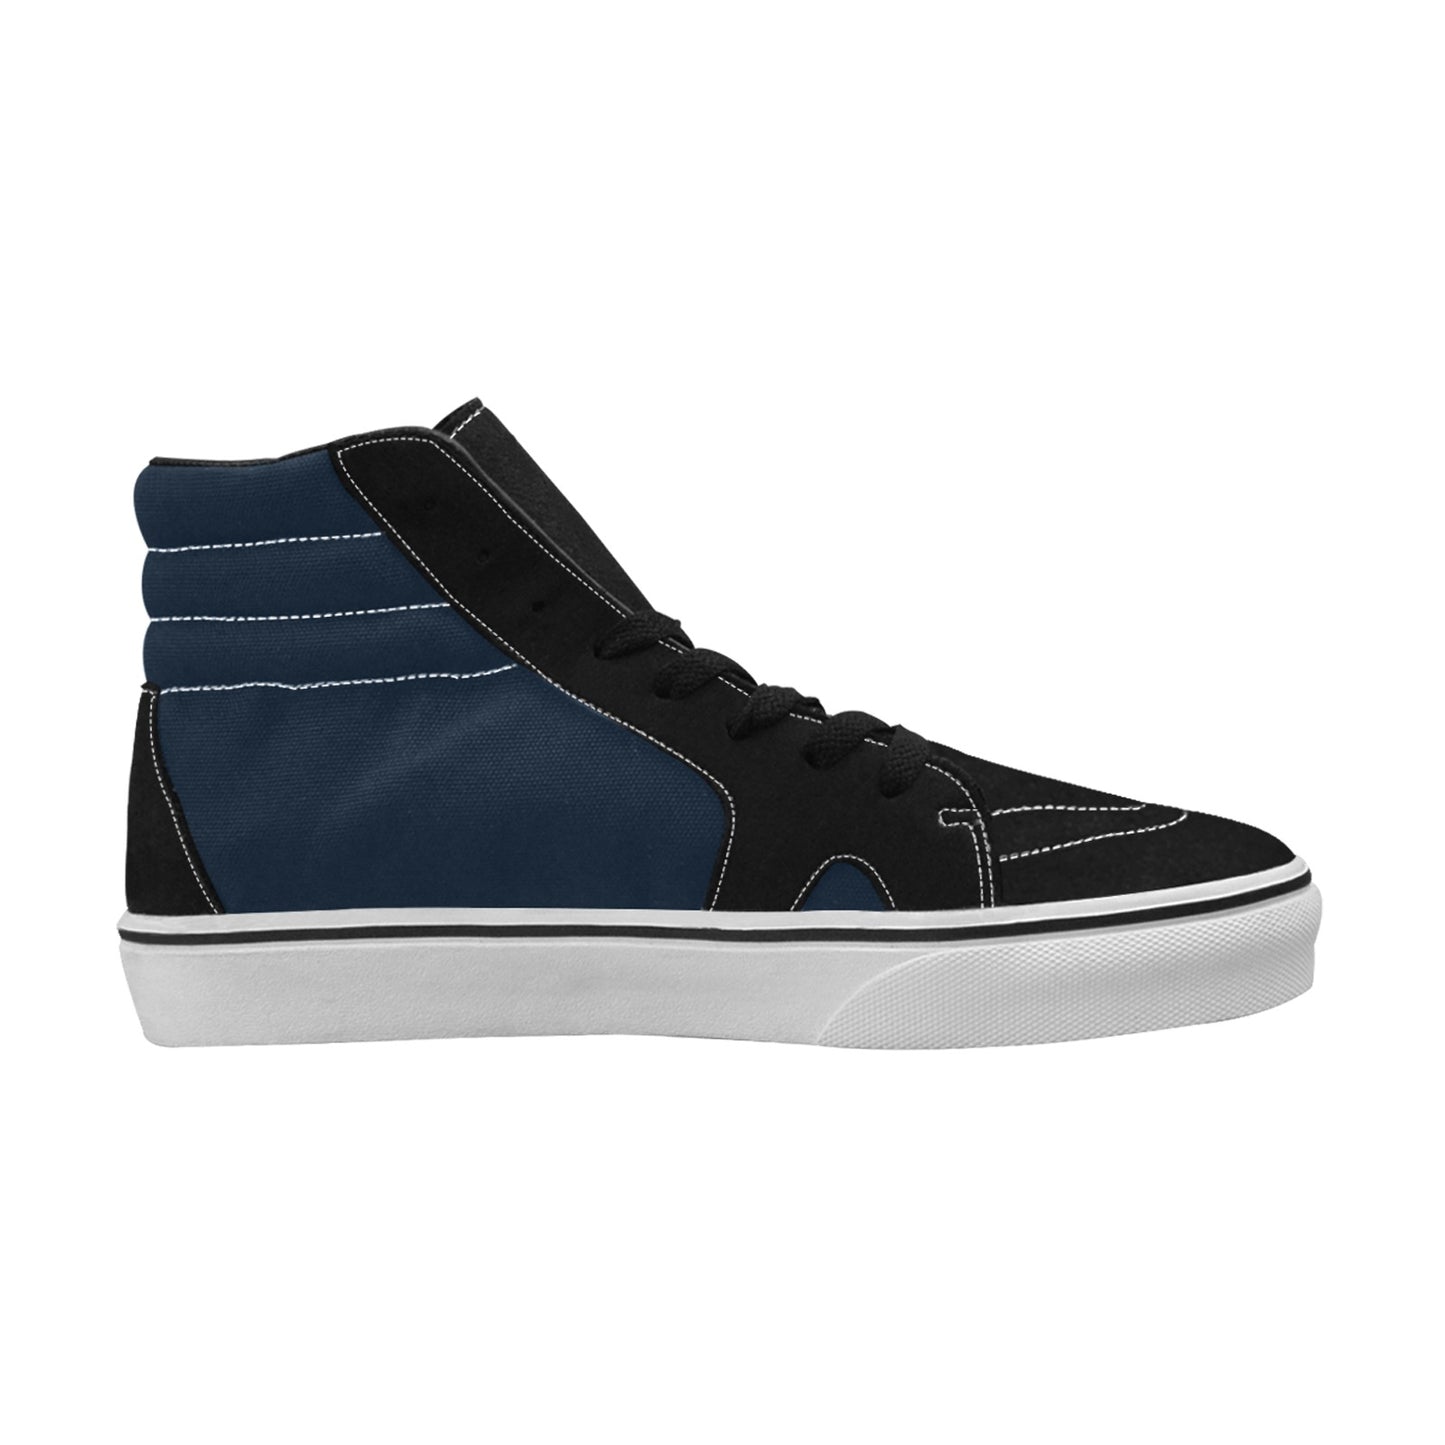 Badge of Pearls Women's High Top Canvas Shoes